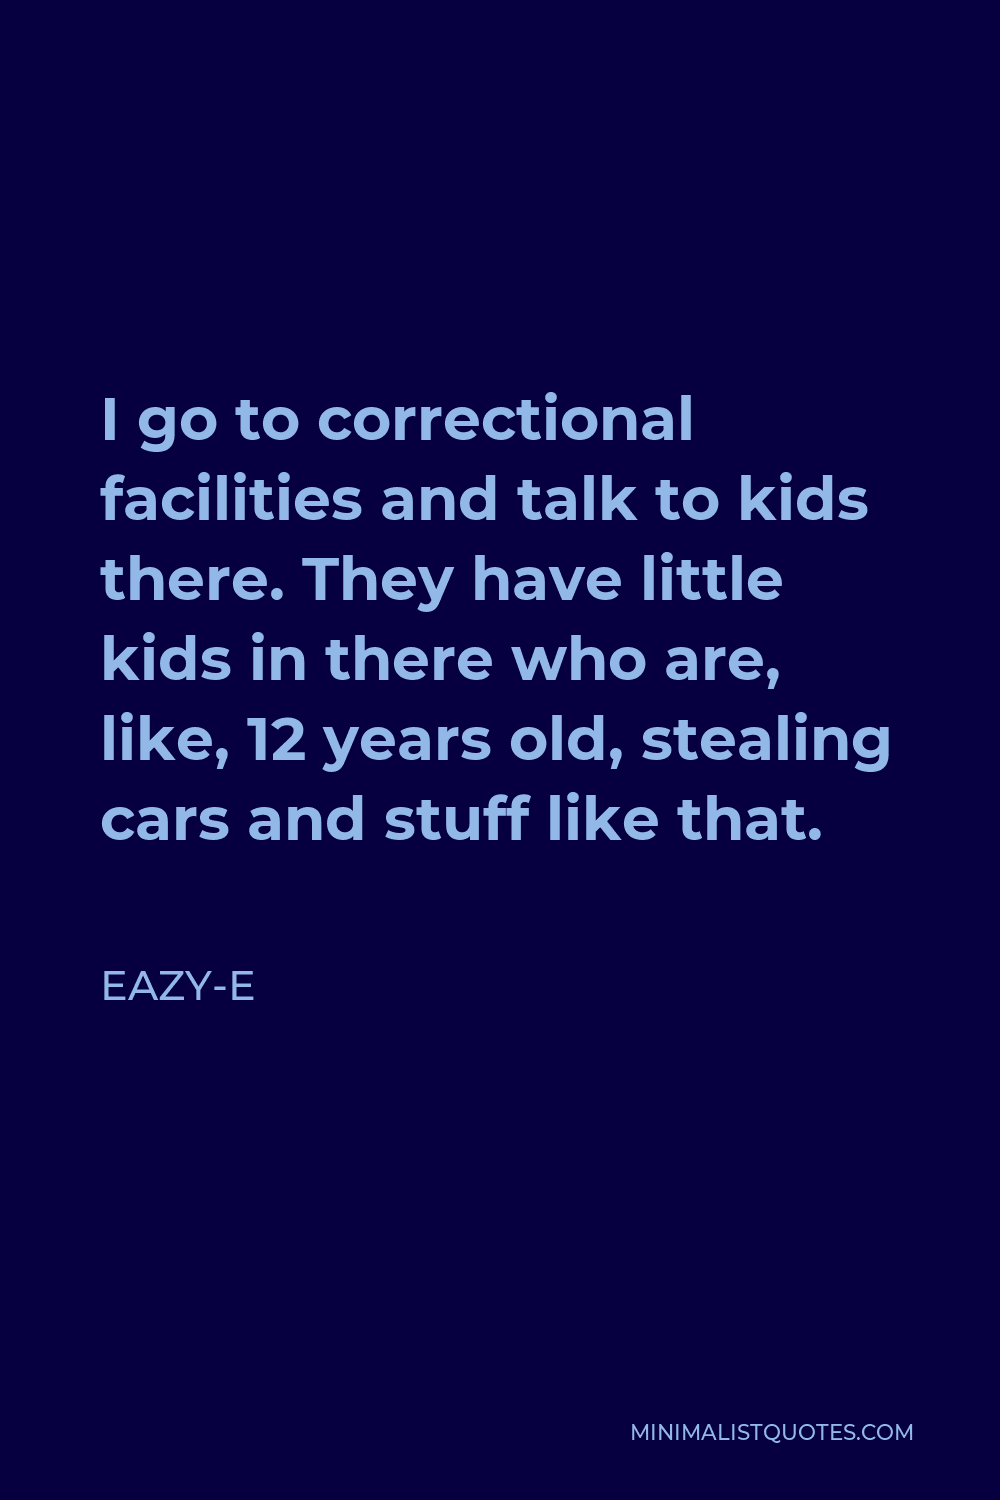 Eazy-E Quote - I go to correctional facilities and talk to kids there. They have little kids in there who are, like, 12 years old, stealing cars and stuff like that.